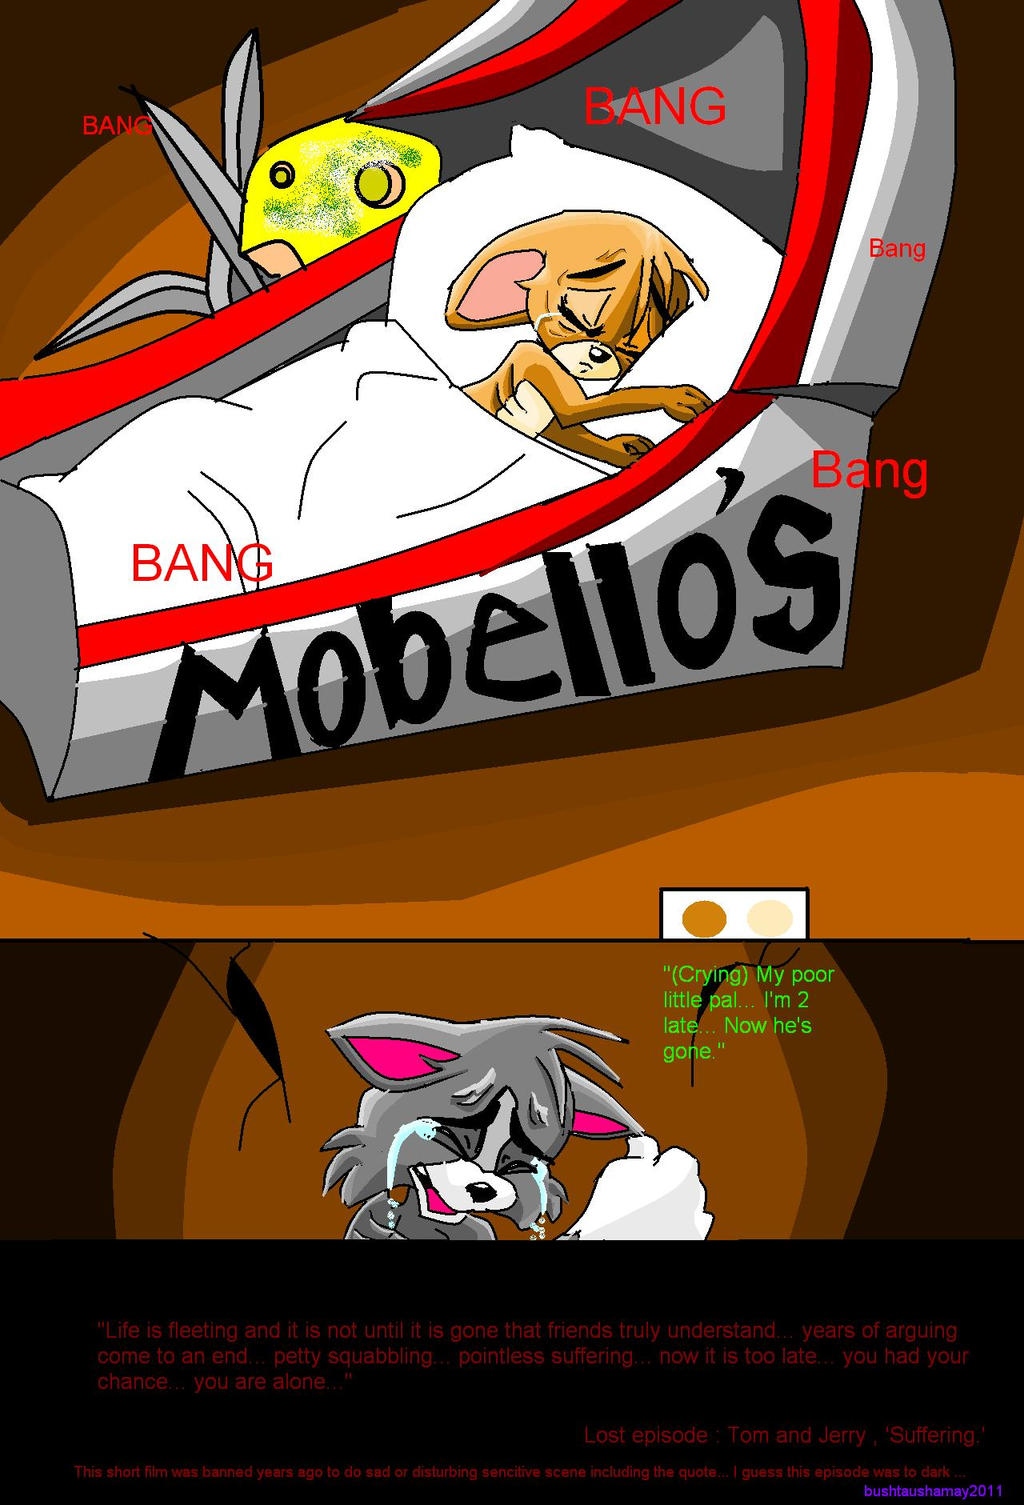 Banned Episode_Tom and Jerry_Suffering by LoonataniaTaushaMay on DeviantArt